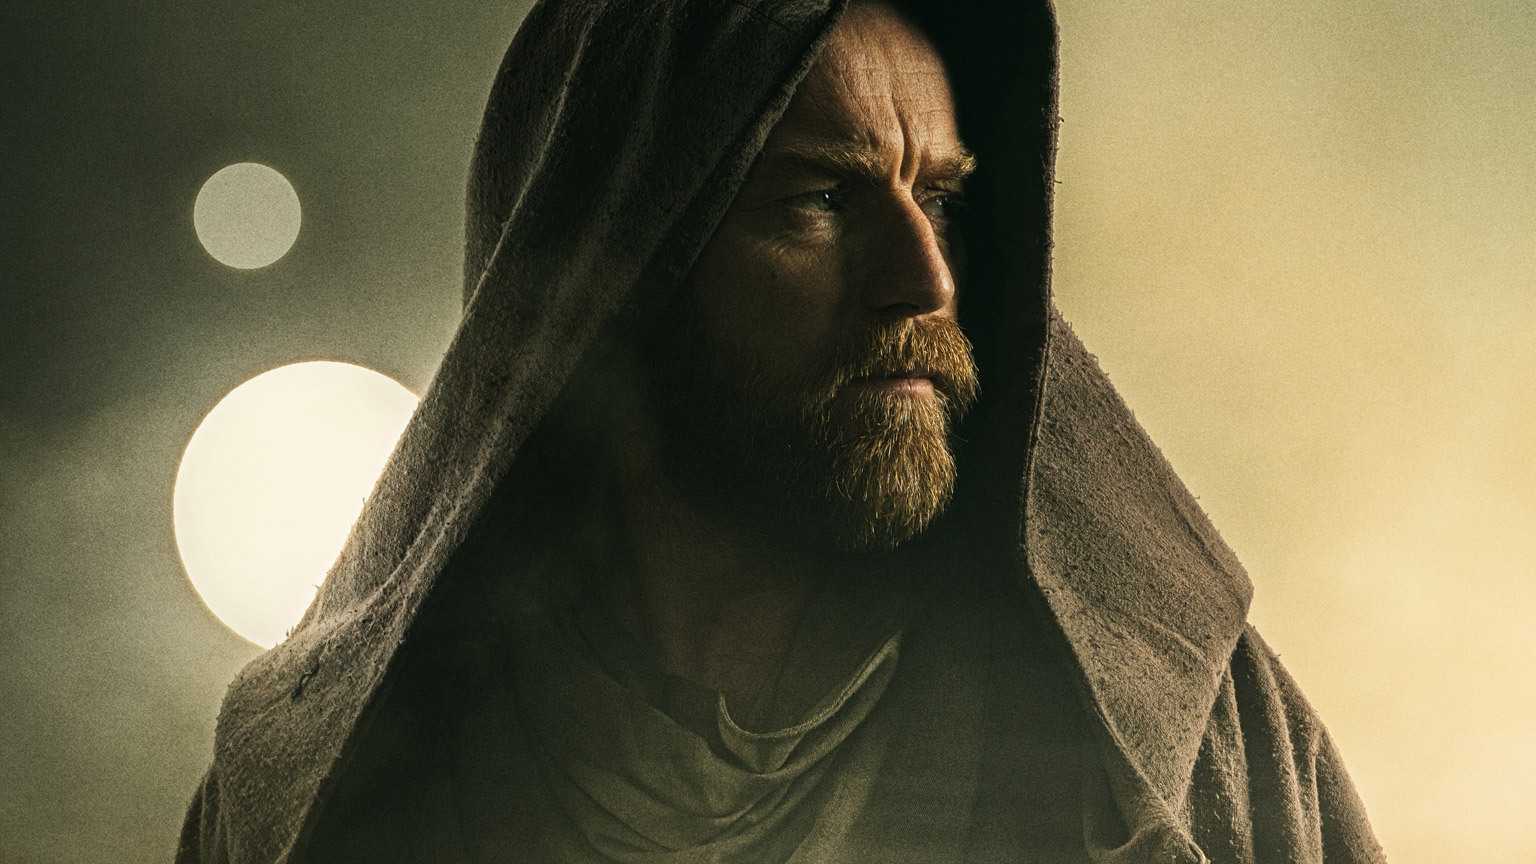 Obi-Wan Kenobi - The upcoming Star Wars series releases new and stunning pictures of a galaxy far far away